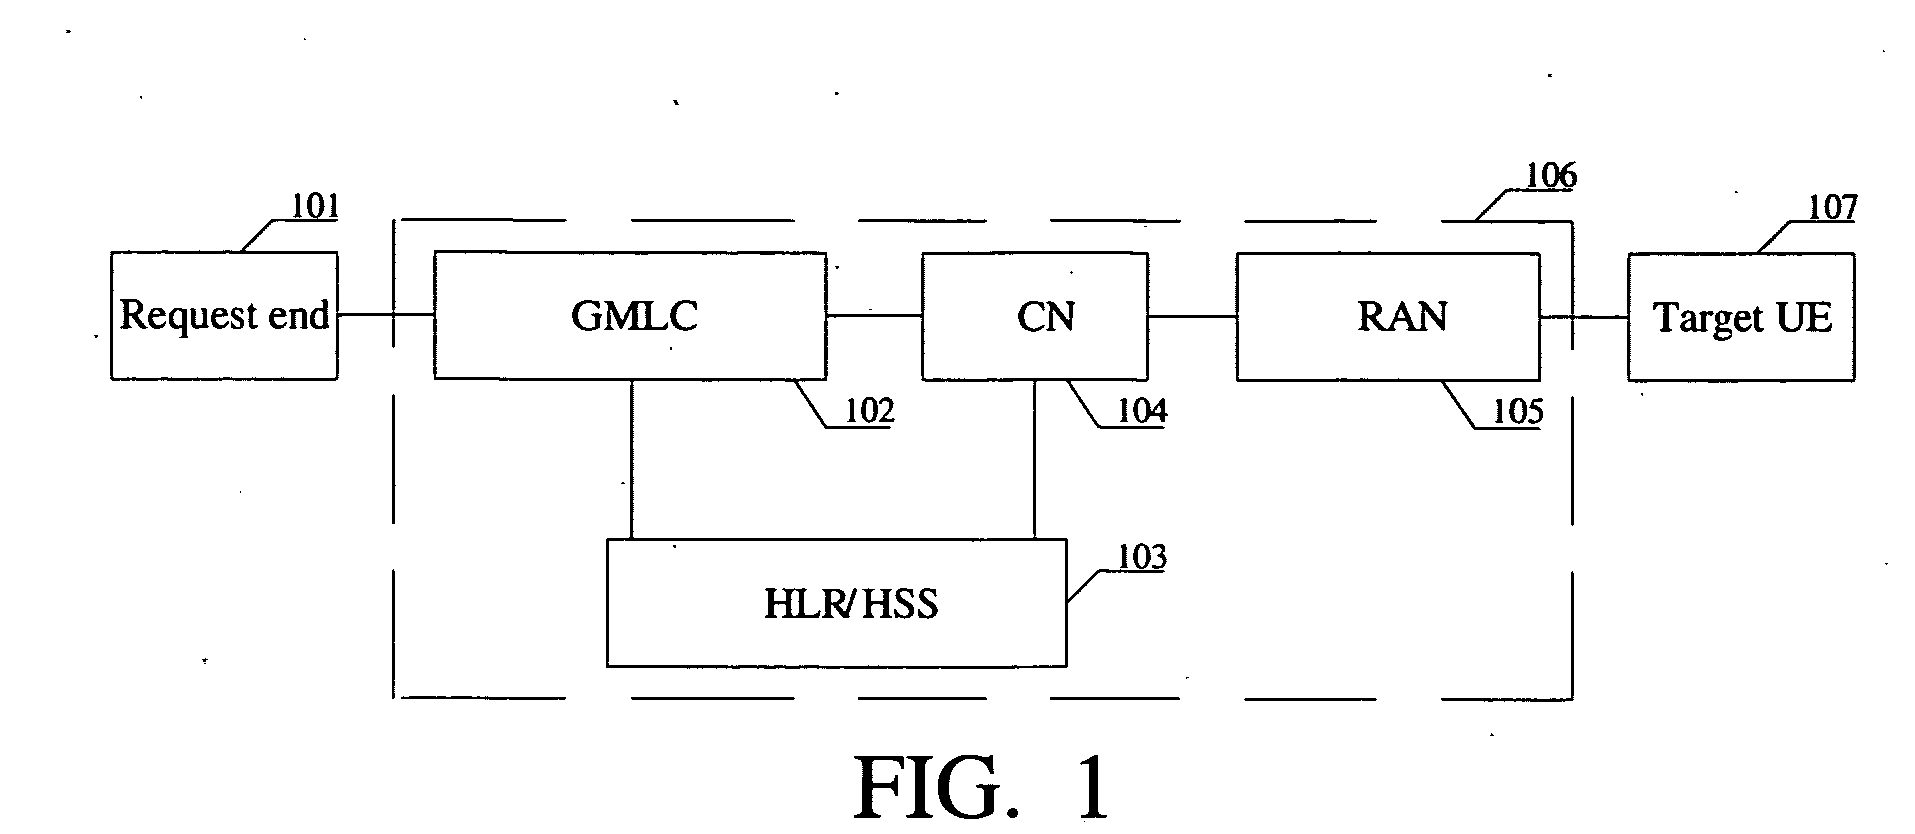 Method of processing a periodic location request